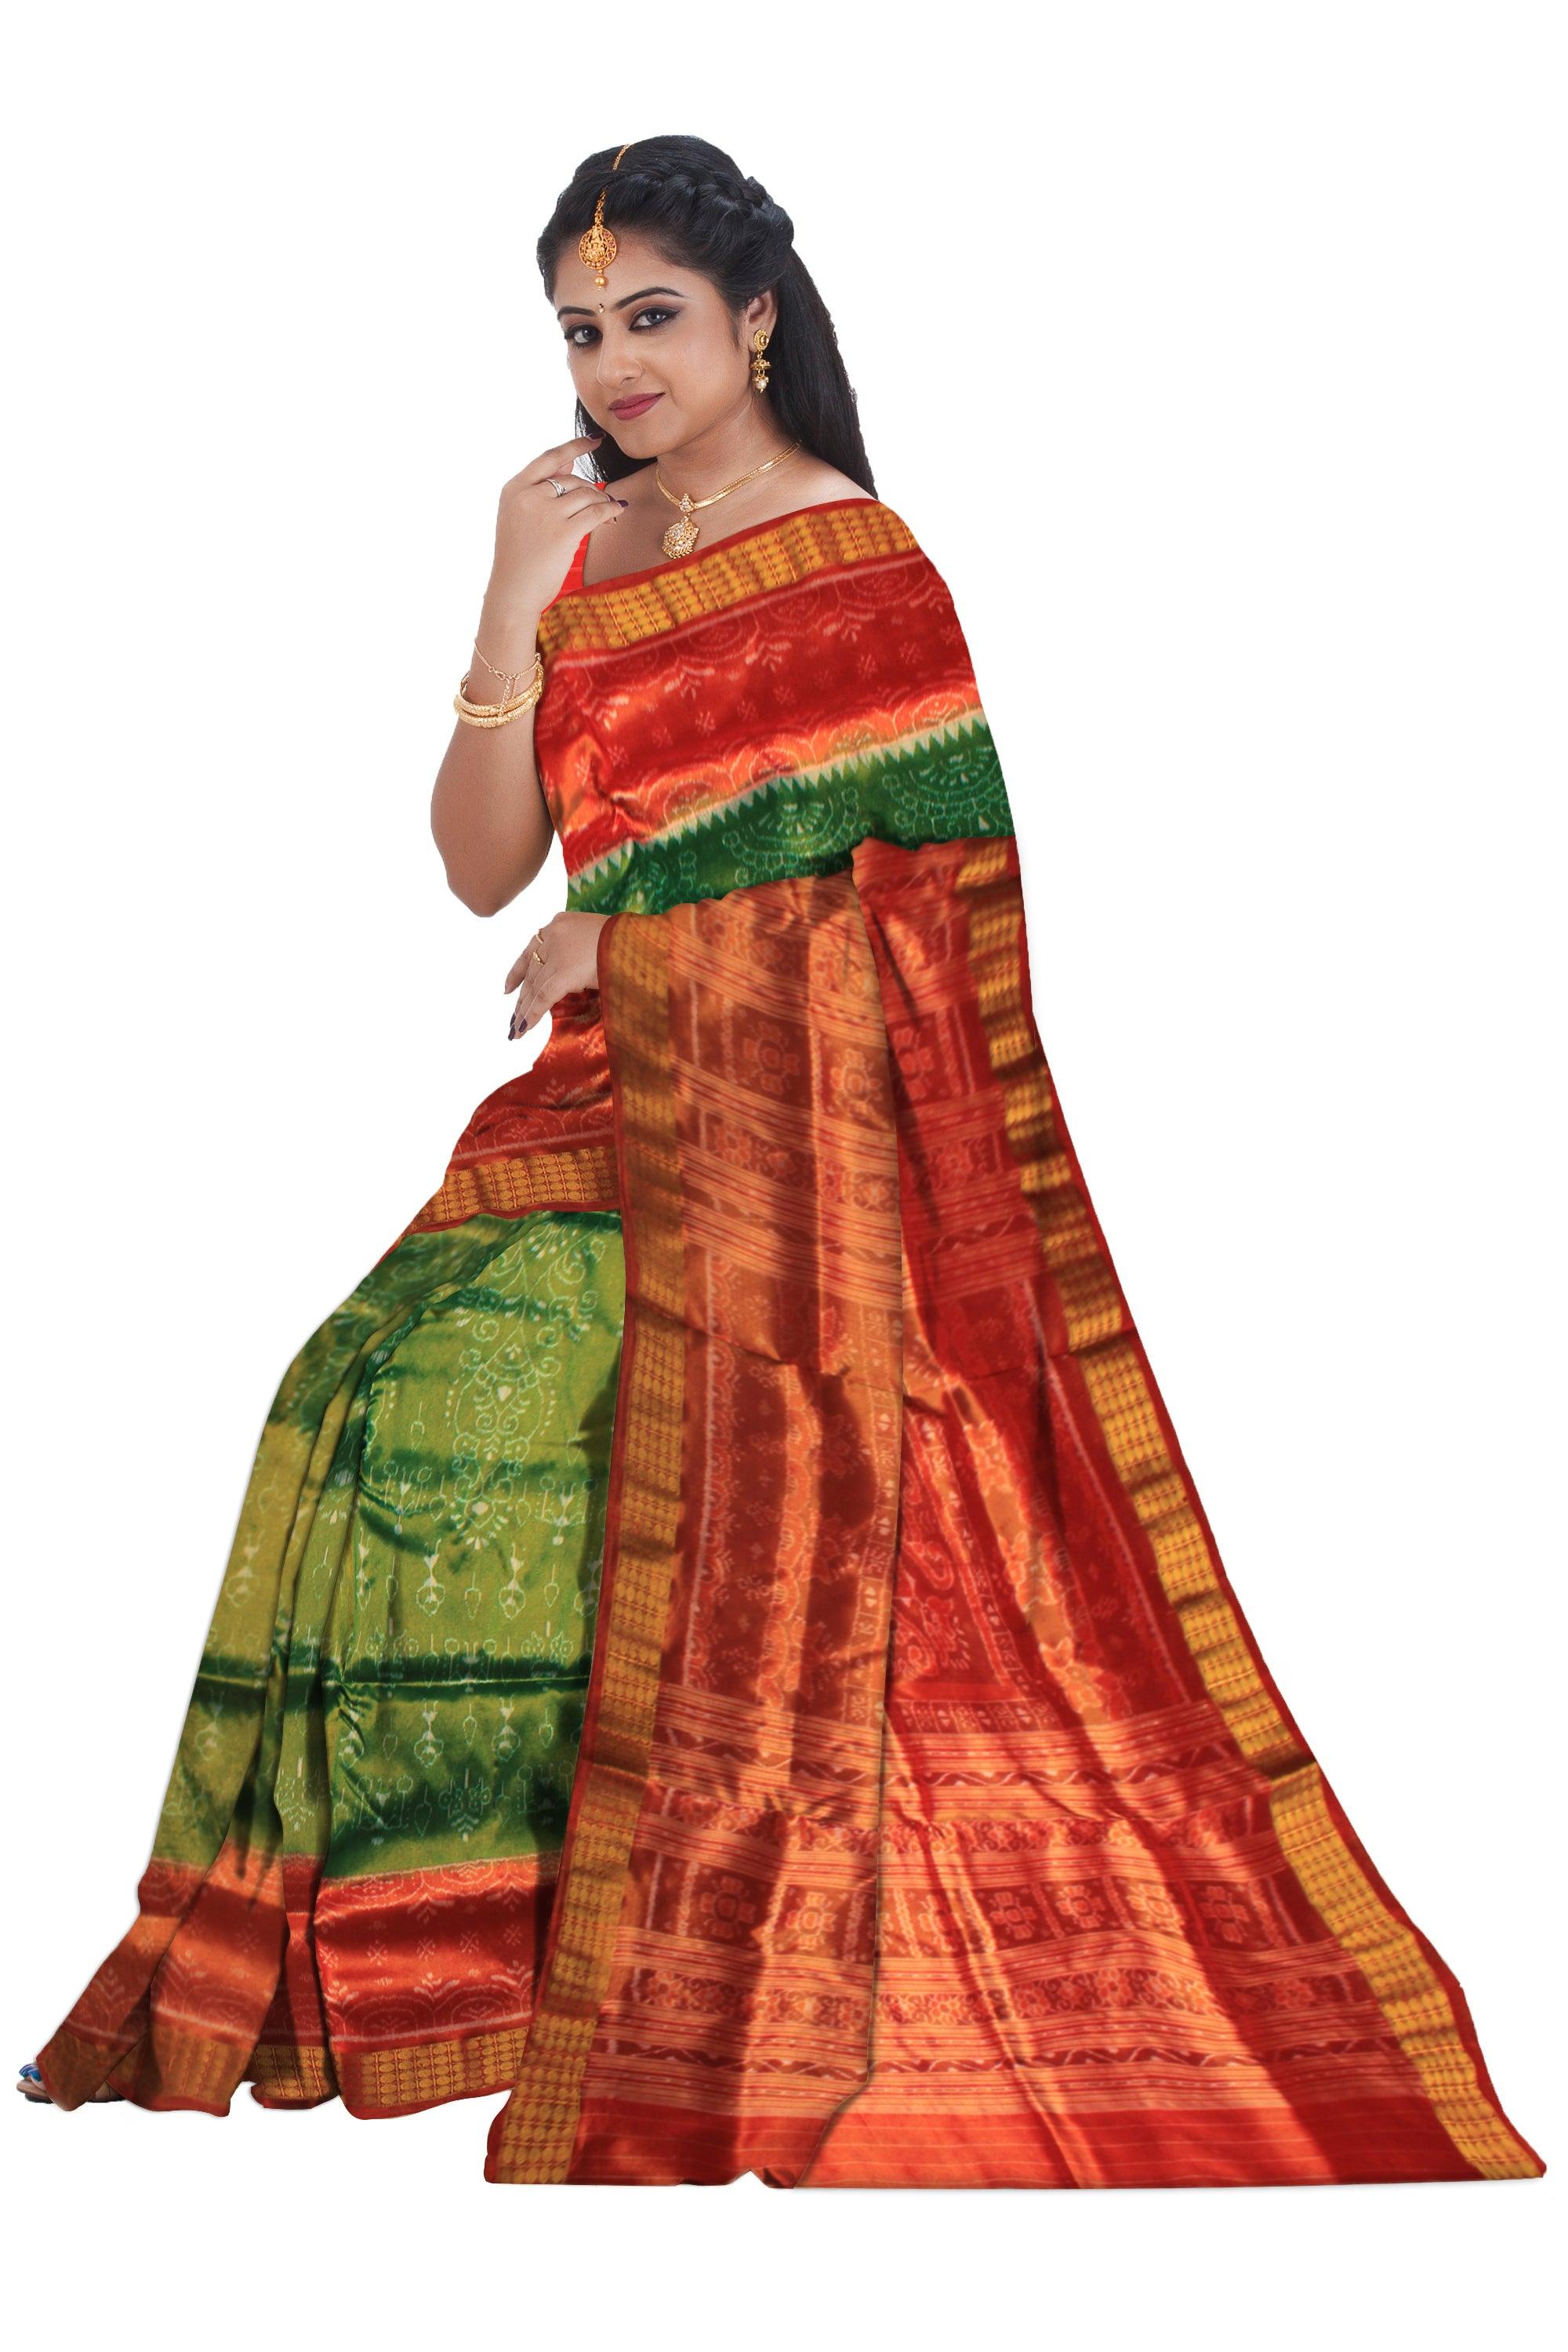 MARRIAGE COLLECTION GRREEN WITH RED PURE HANDWOVEN TISSUE SAREE WITH BLOUSE PIECE. - Koshali Arts & Crafts Enterprise